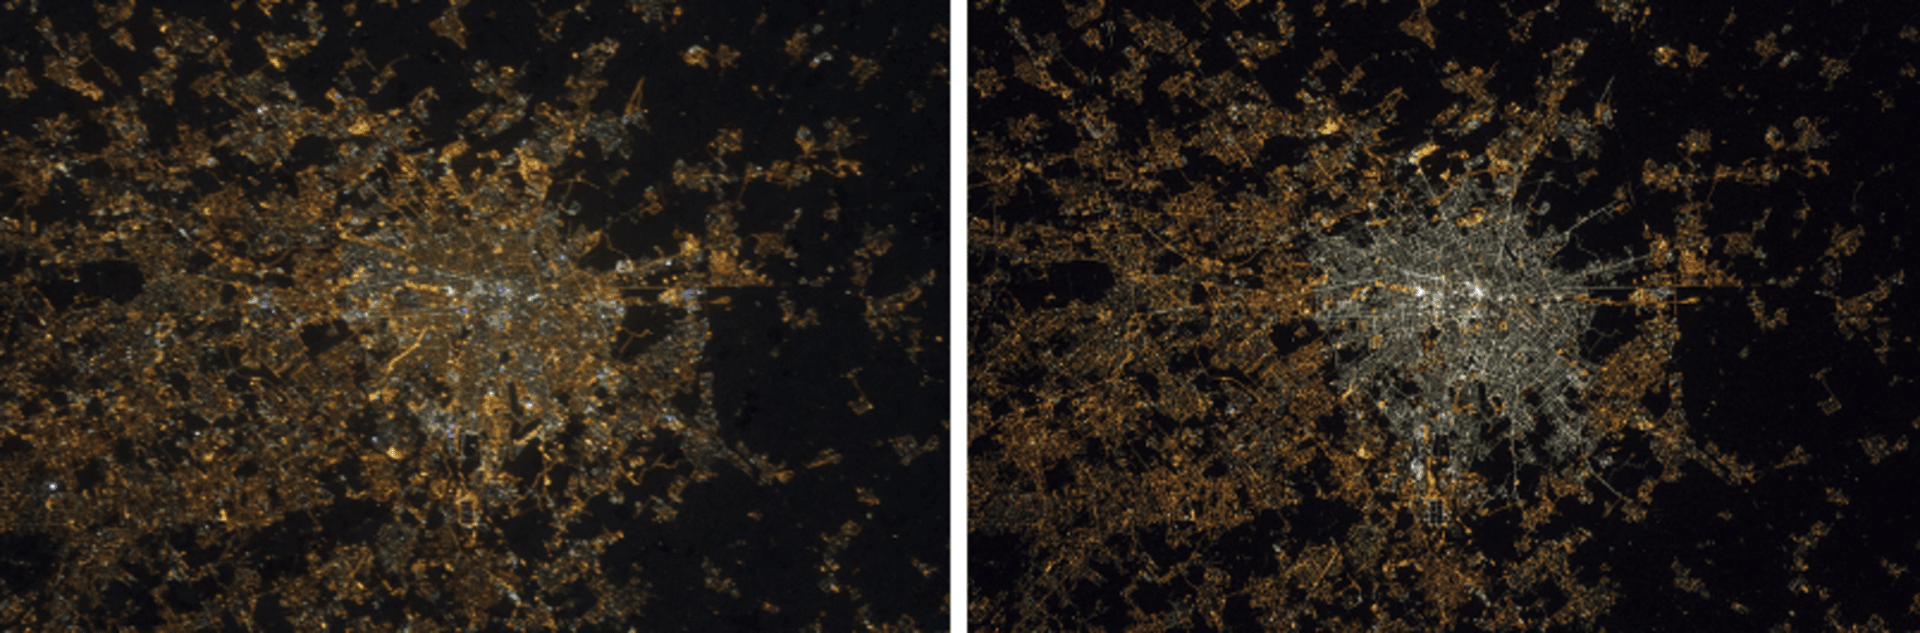 ISS astronauts mapped light pollution in Europe 2